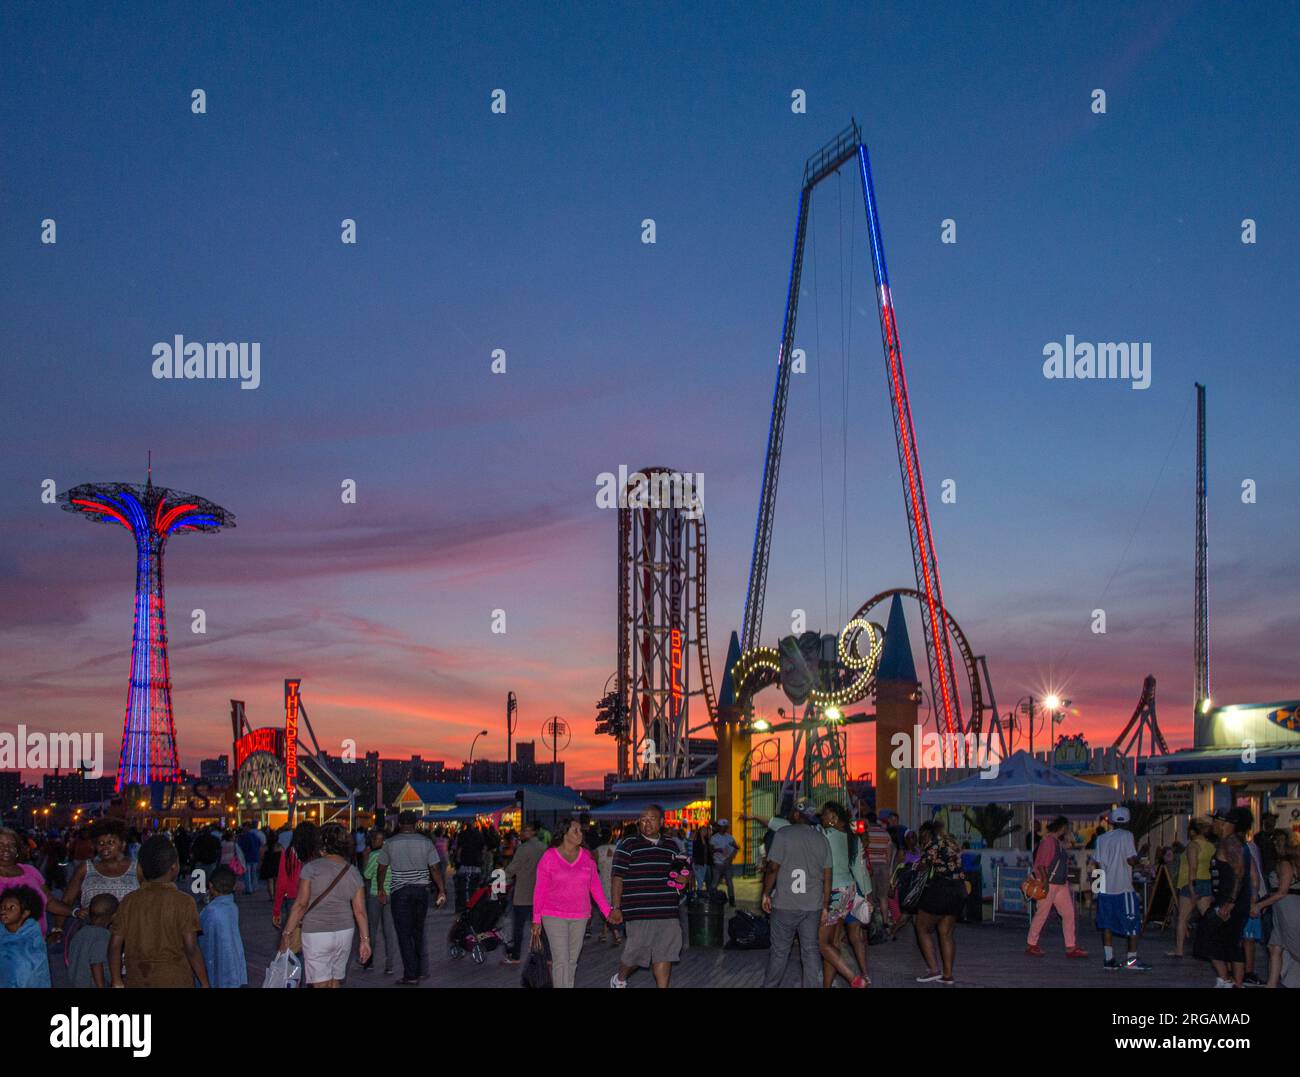 Rides at Coney Island in New York at dusk Stock Photo